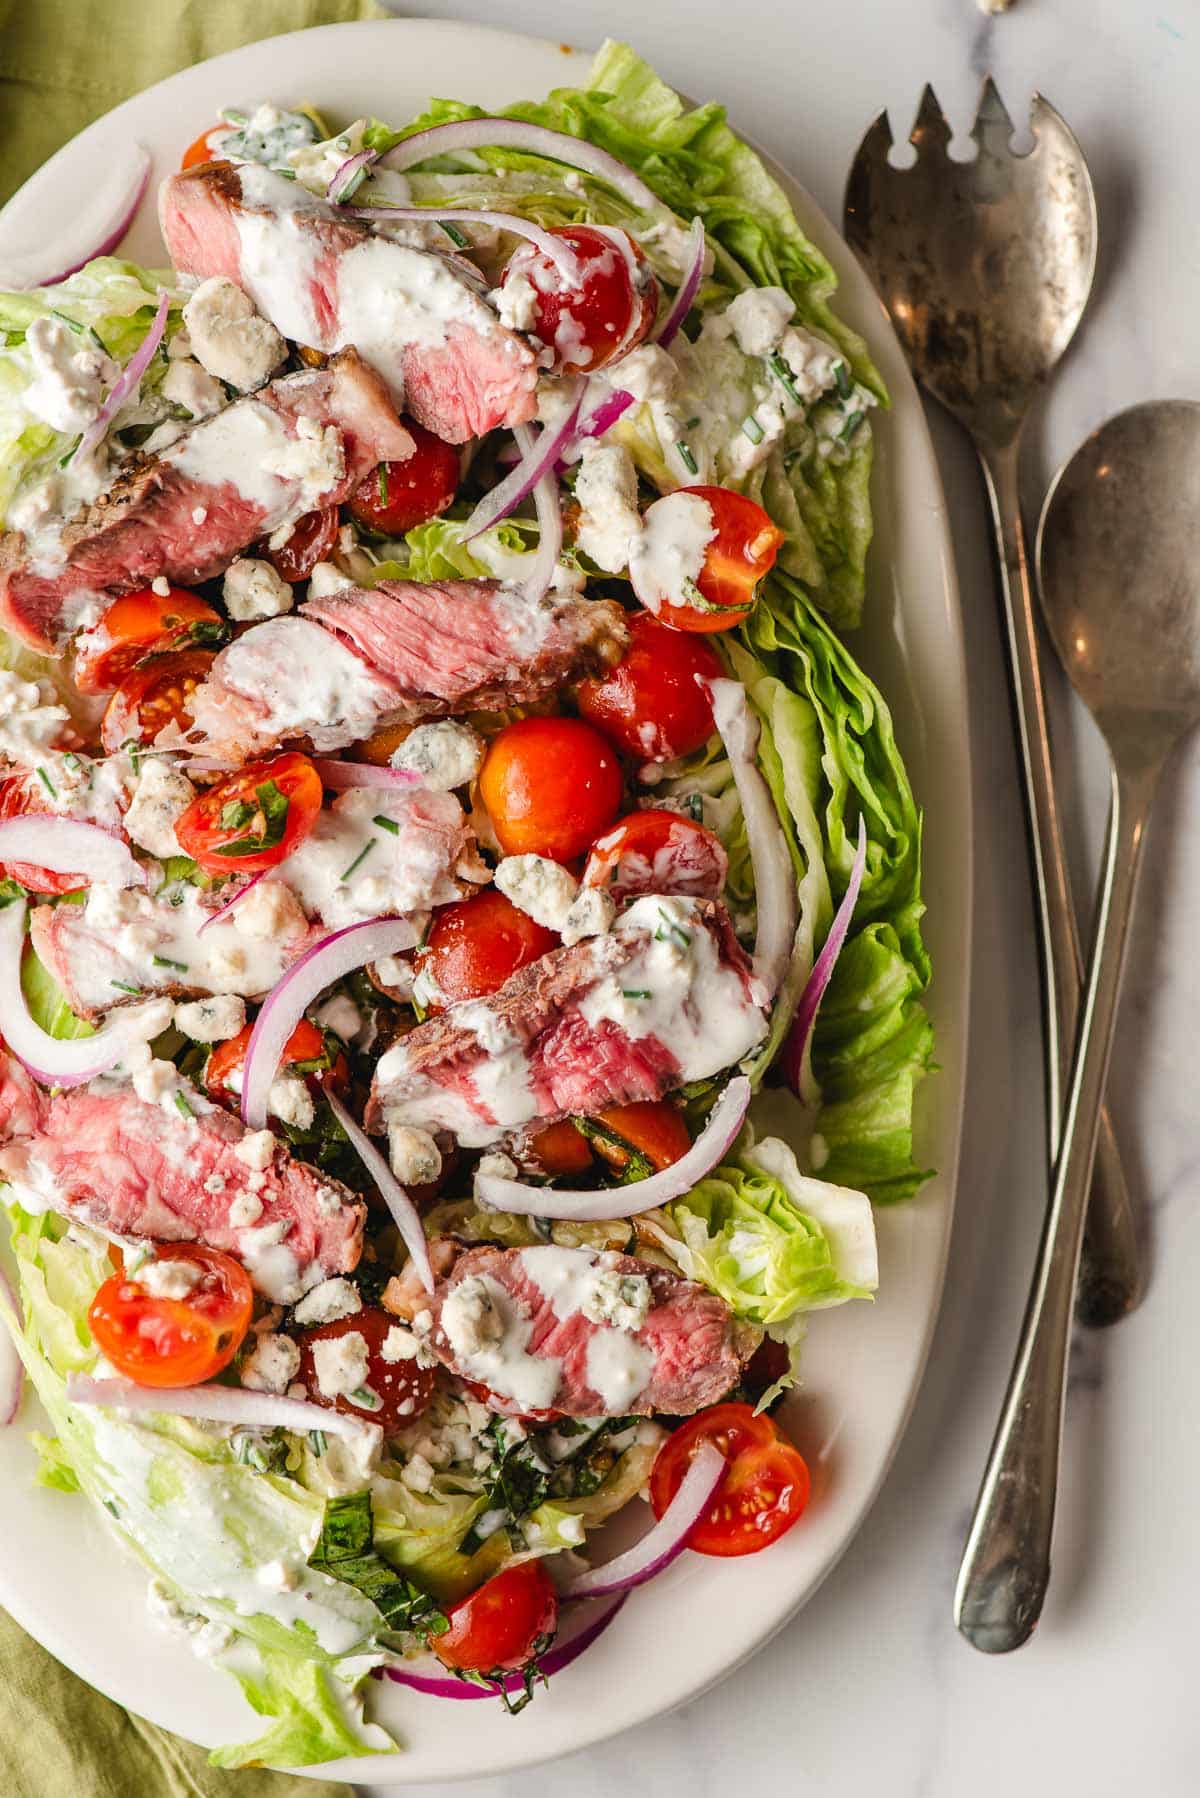 Iceberg wedge salad with steak, blue cheese dressing, tomatoes, and red onion.